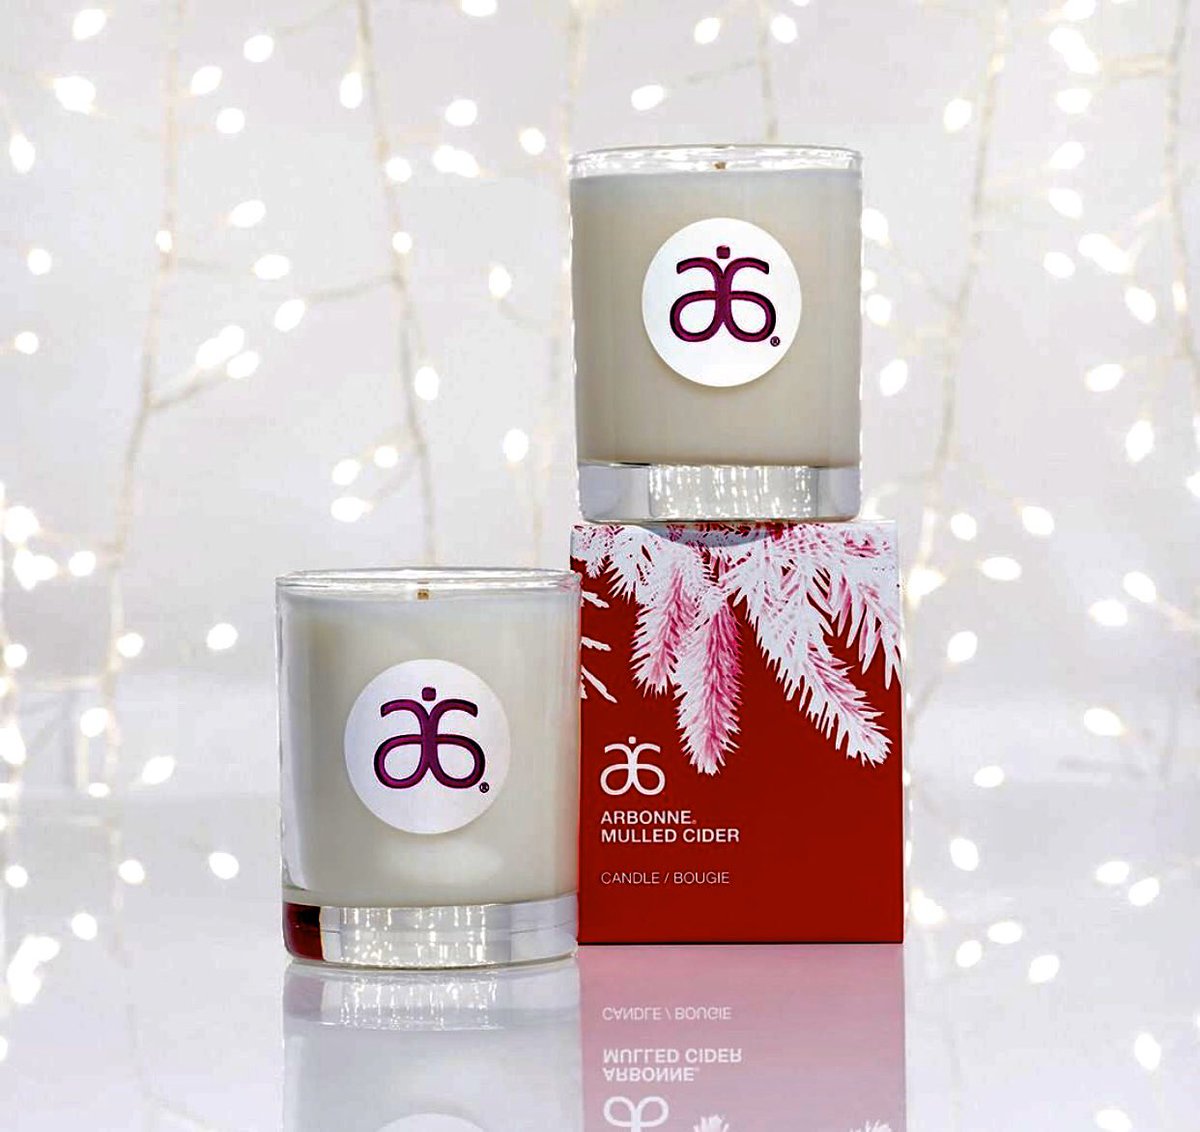 Who doesn’t love the relaxing glow of candles! Let the scent of warm mulled cider￼ fill your home with this￼ hand poured coconut￼ wax blend candle. #holidaycandle #arbonne #mulledcider #nontoxic ￼￼￼￼